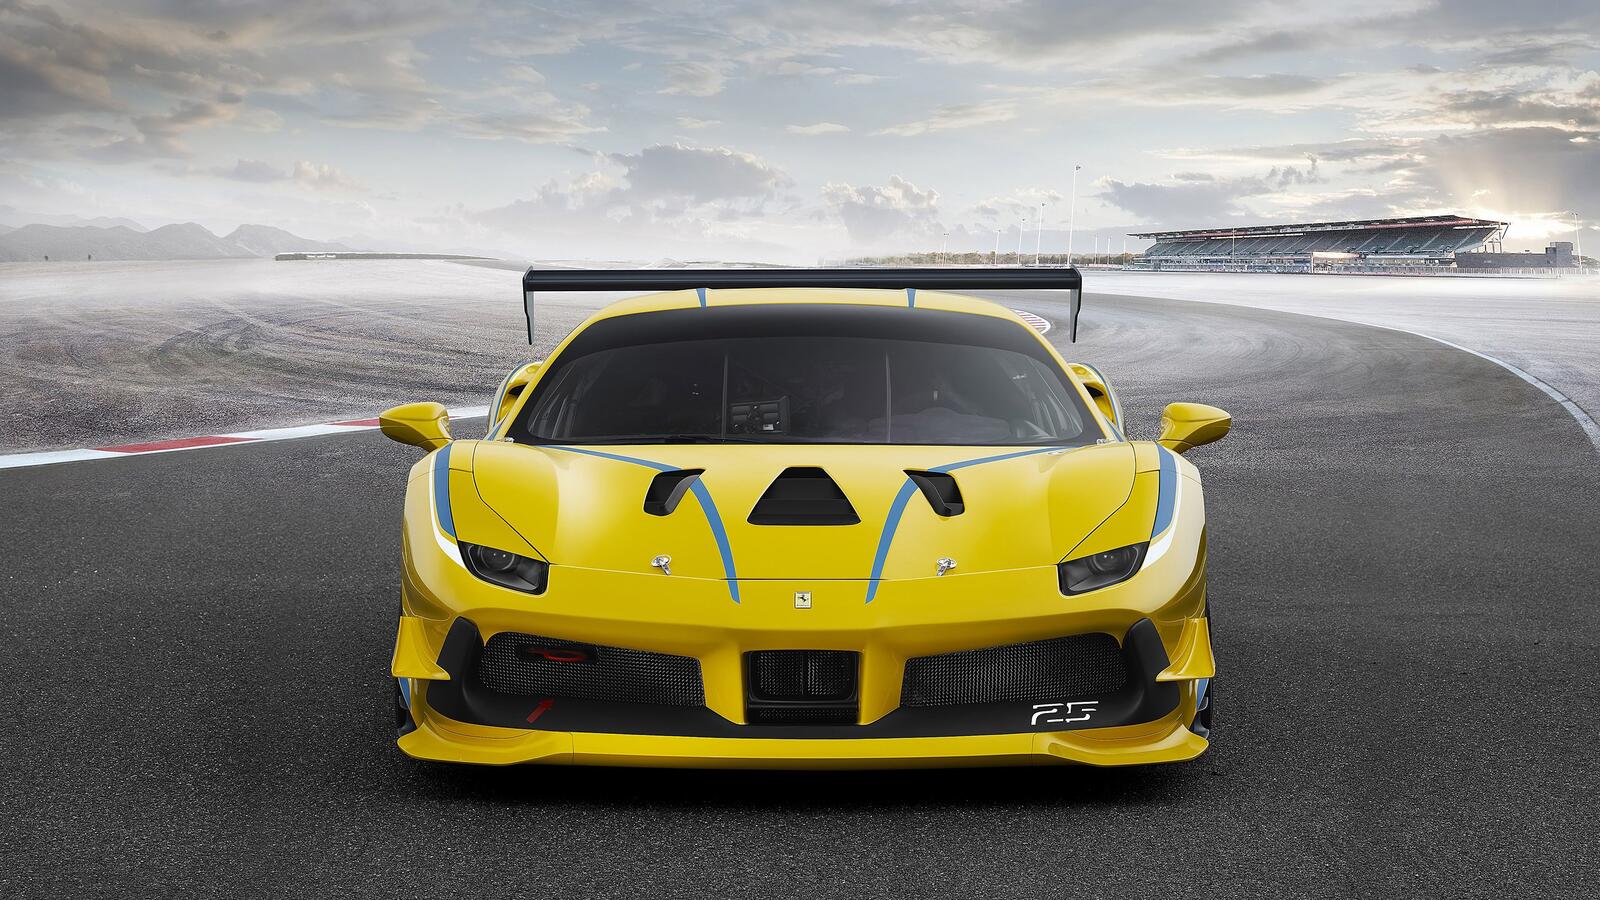 Wallpapers Ferrari 488 front view yellow on the desktop